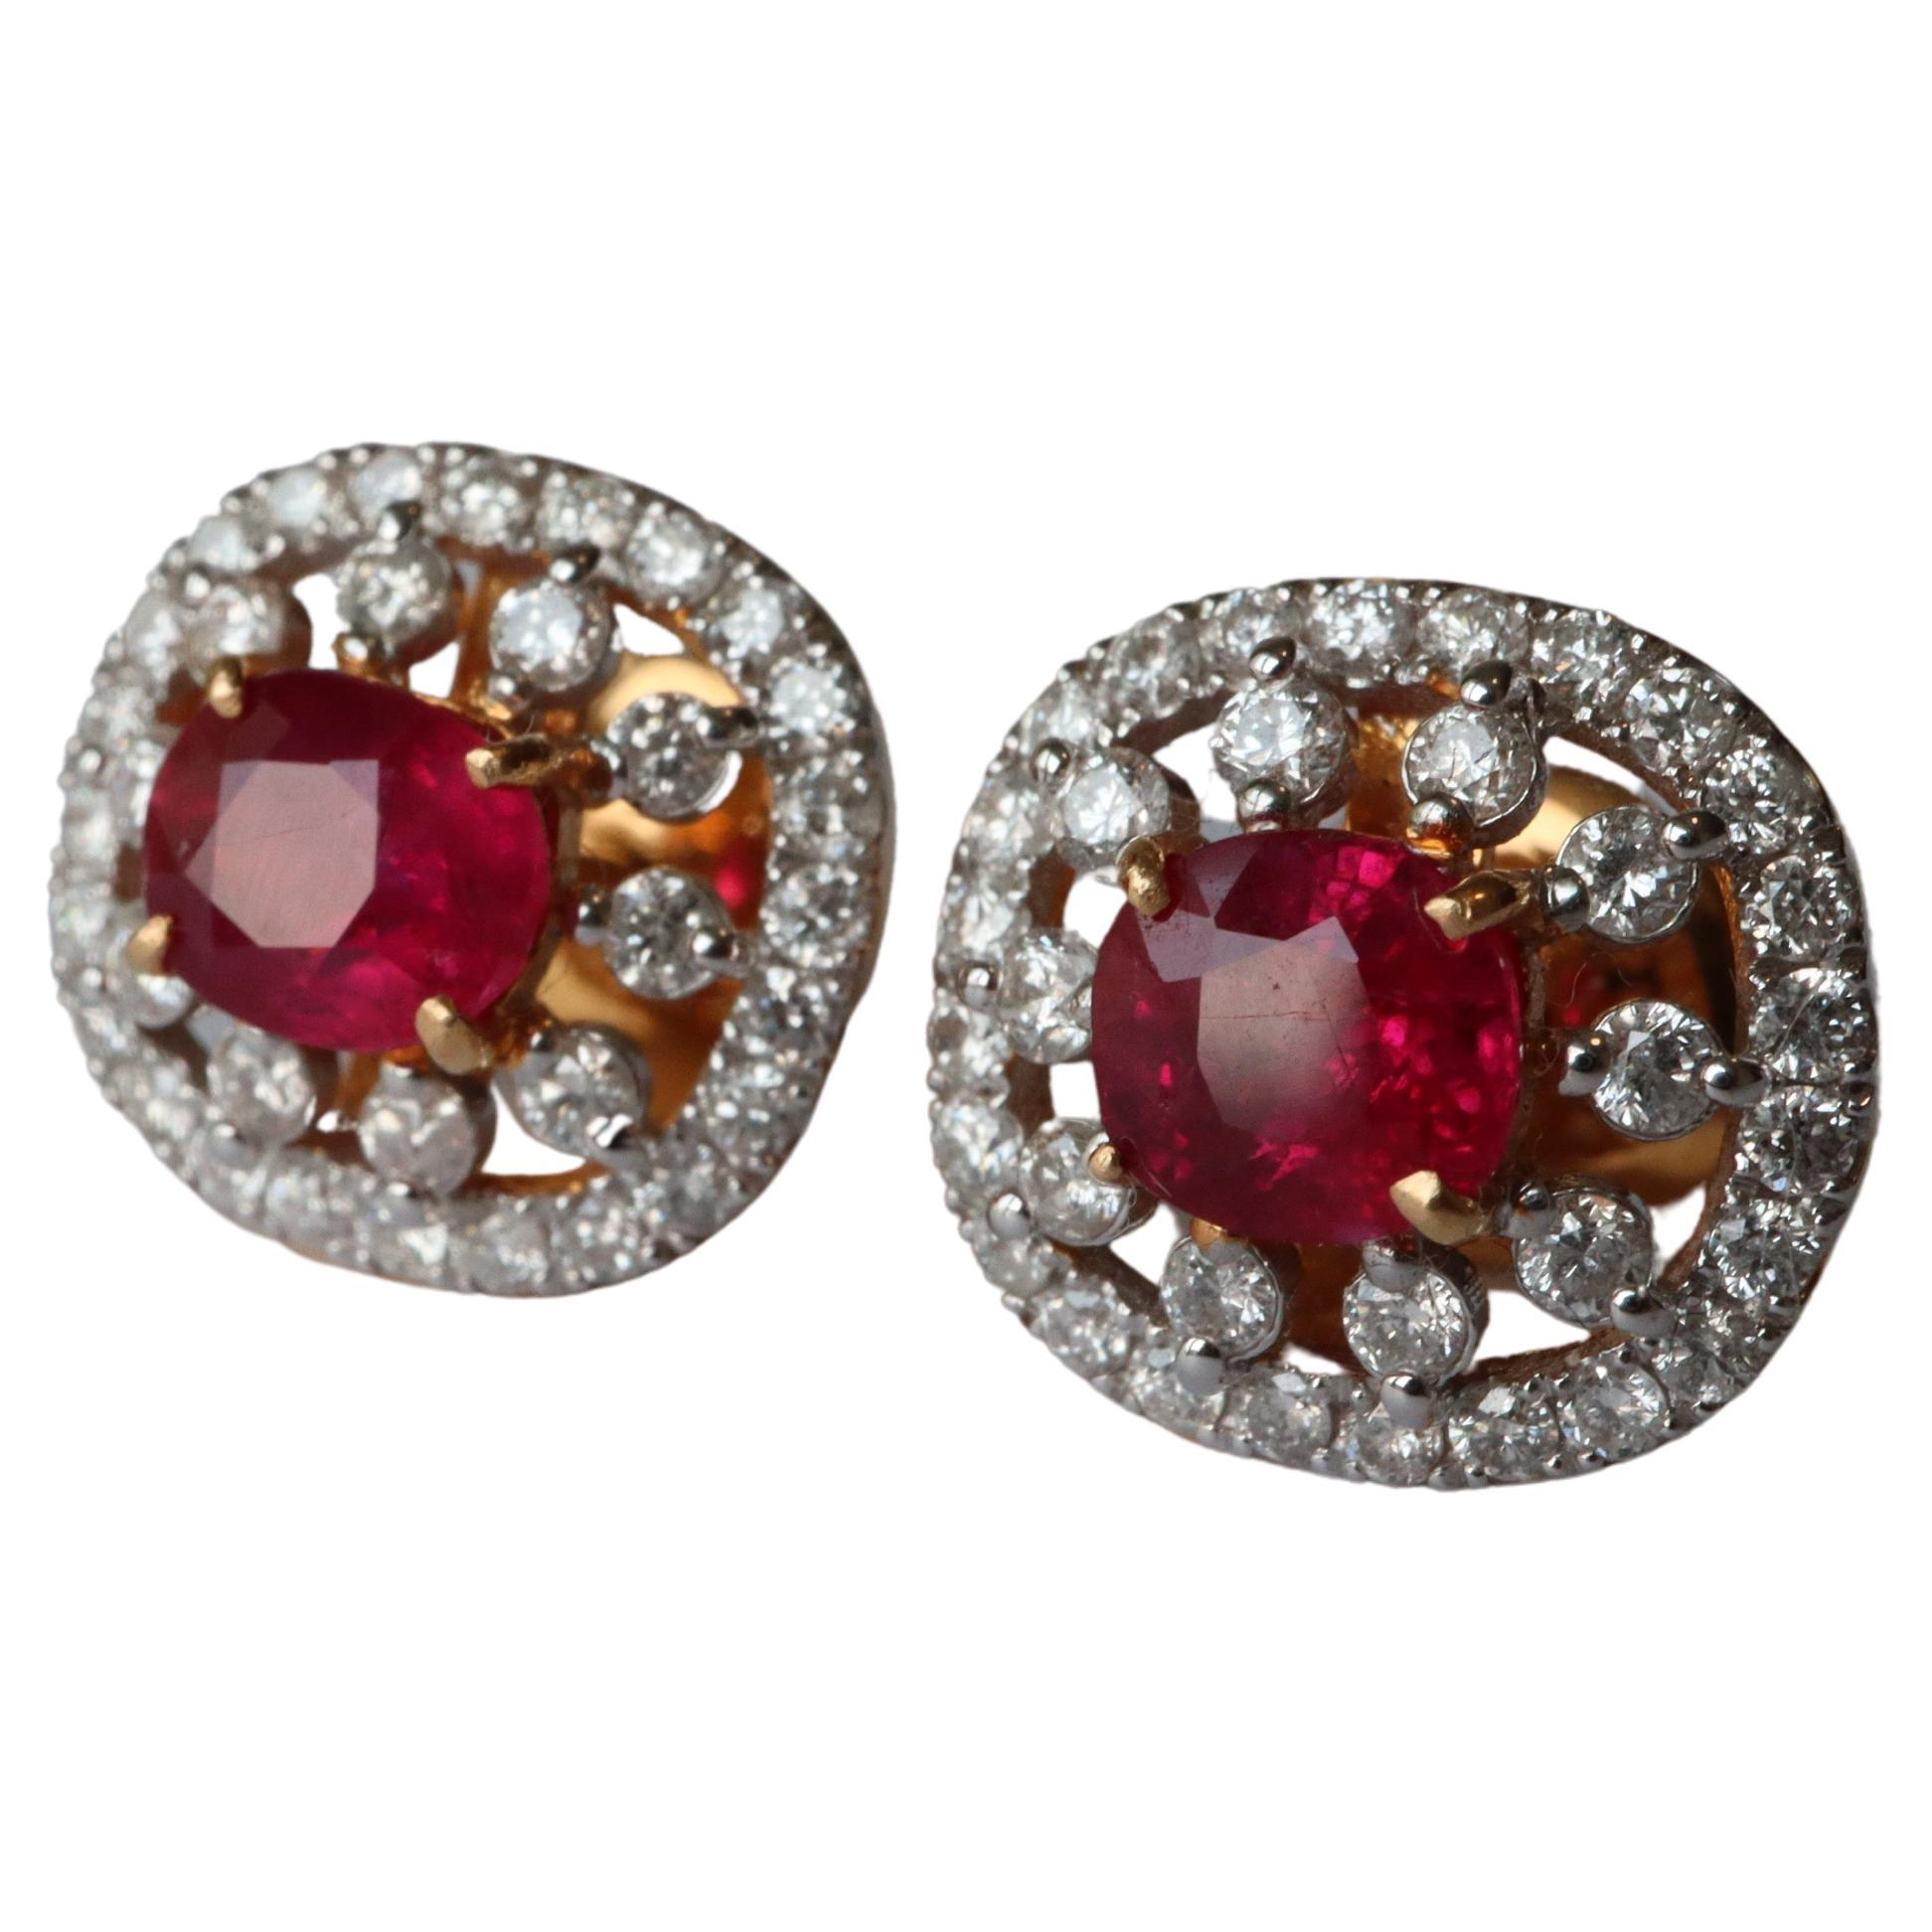 Discover the charm of our beautiful Ruby Earrings, each featuring over 1-carat Burma Ruby from the Mogok region, surrounded by natural diamonds for a touch of luxury.

Burma Rubies, sourced from the Mogok region, are renowned for their scarcity and